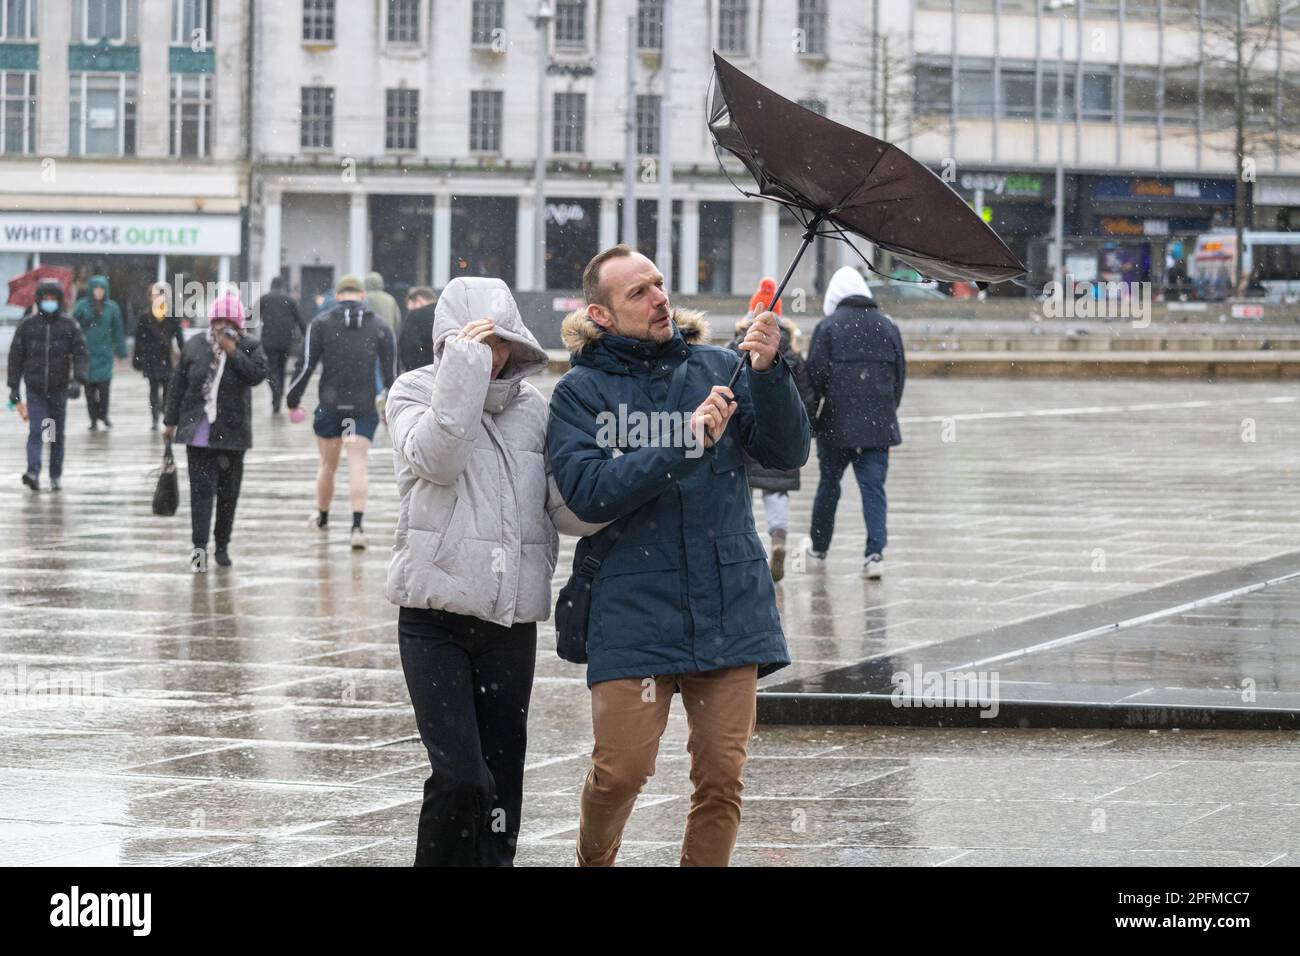 Nottingham, United Kingdom, Feb 18, 2022 - A pedestrian's umbrella was turned inside out by gales of Storm Eunice in Nottingham's Old Market Square. Stock Photo